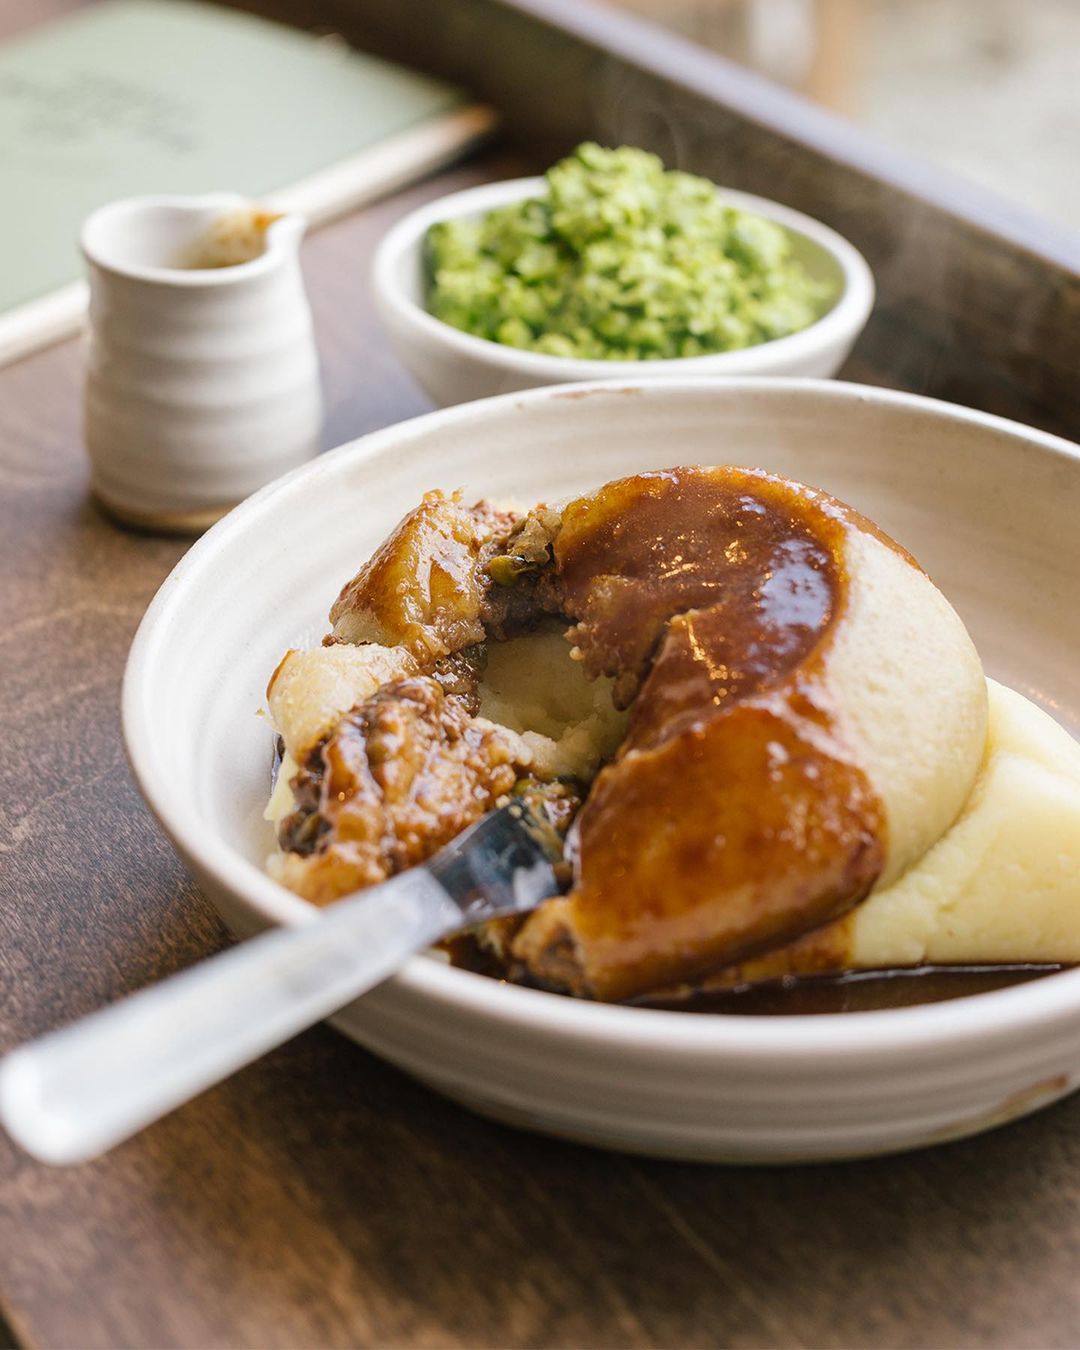 Great North Pie is opening a pie and mash cafe in Manchester, The Manc